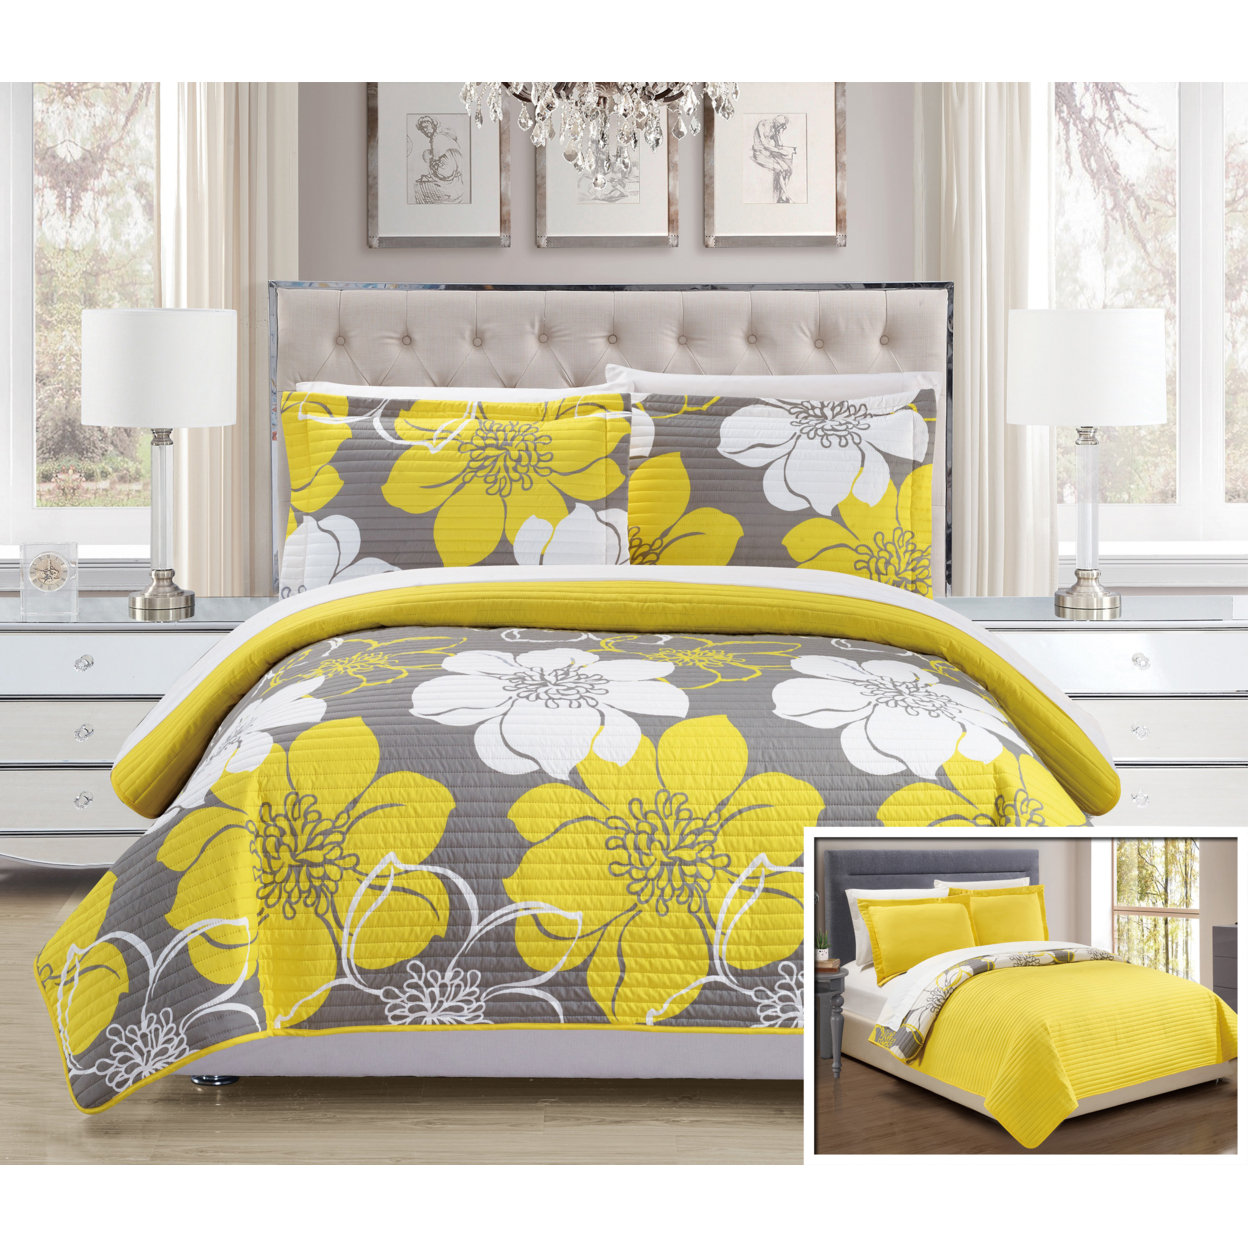 Chic Home Floral Printed Quilt Set, Multiple Colors - Yellow, King